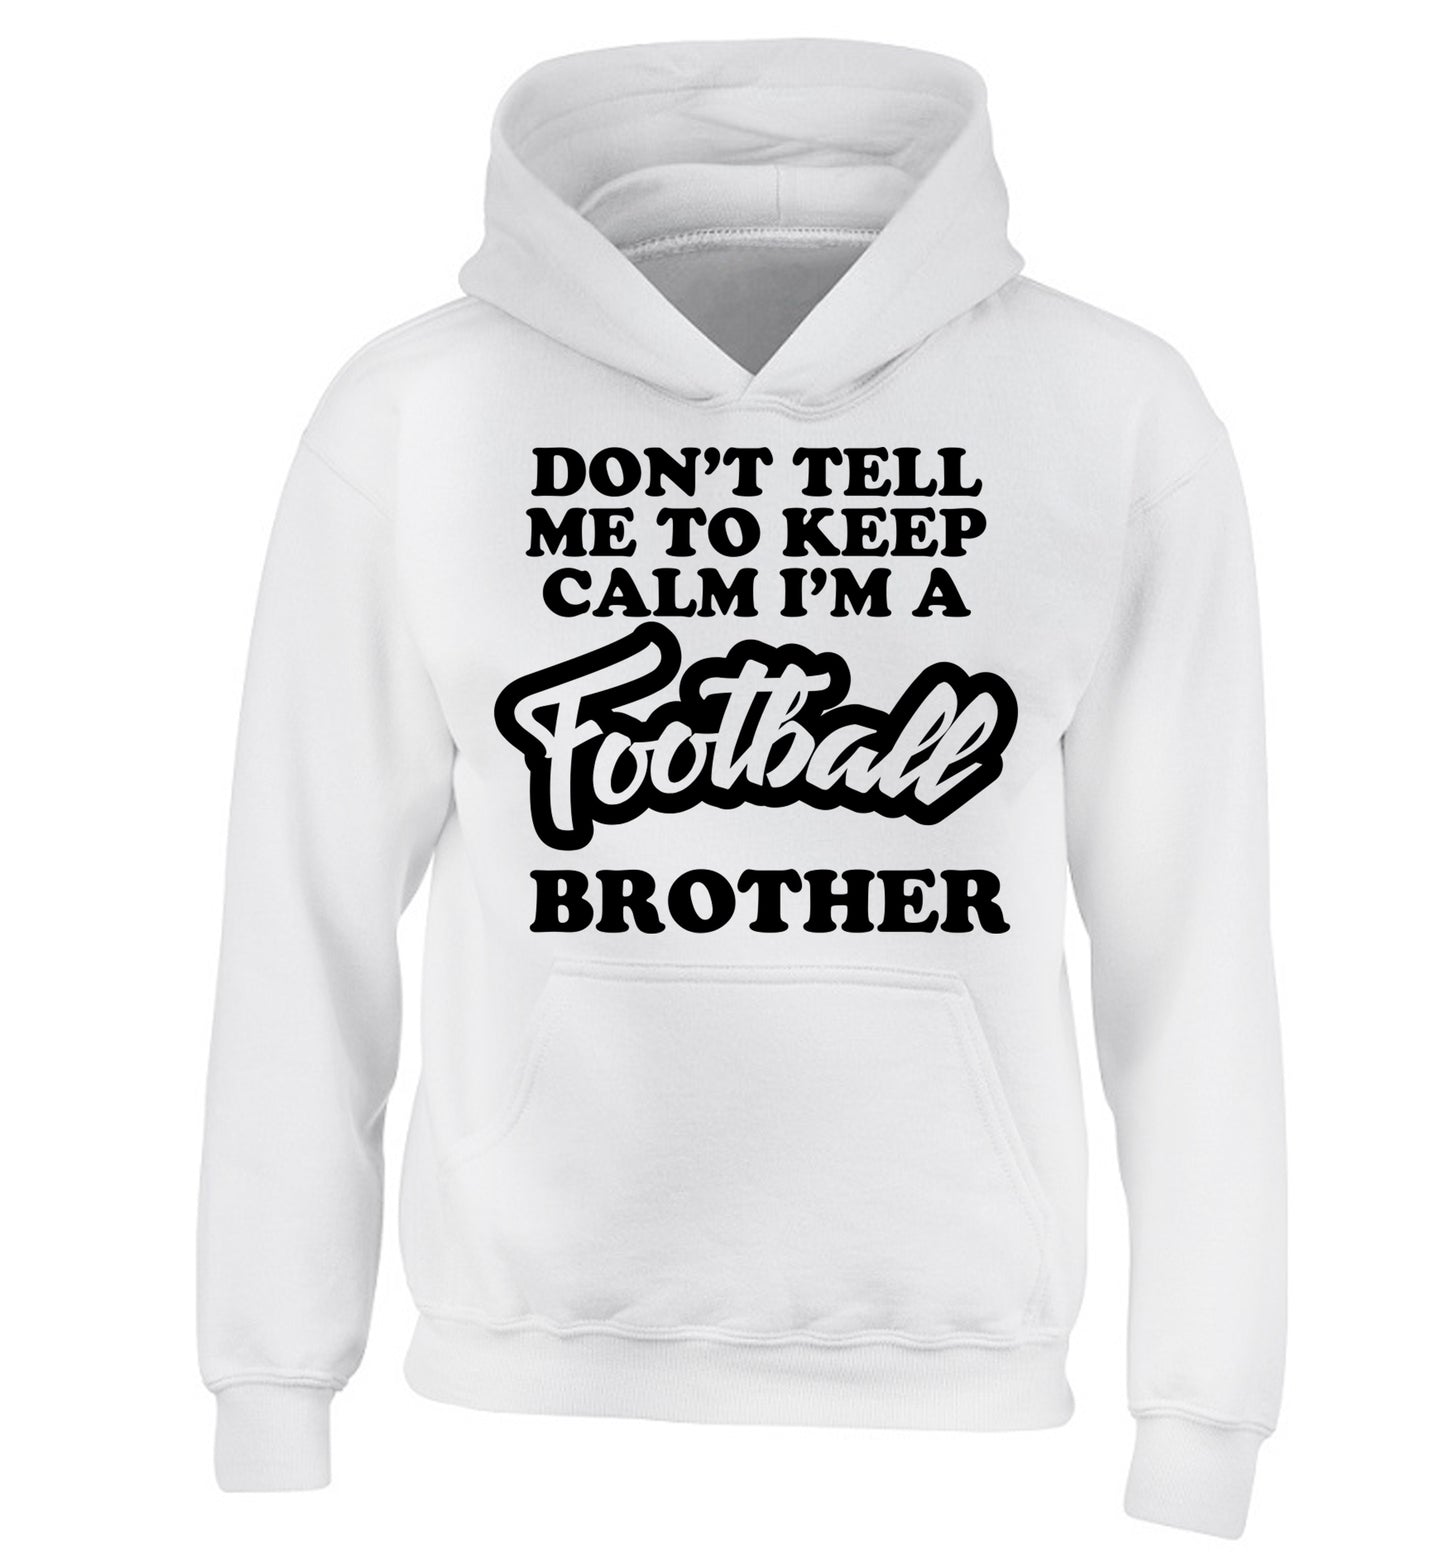 Don't tell me to keep calm I'm a football brother children's white hoodie 12-14 Years